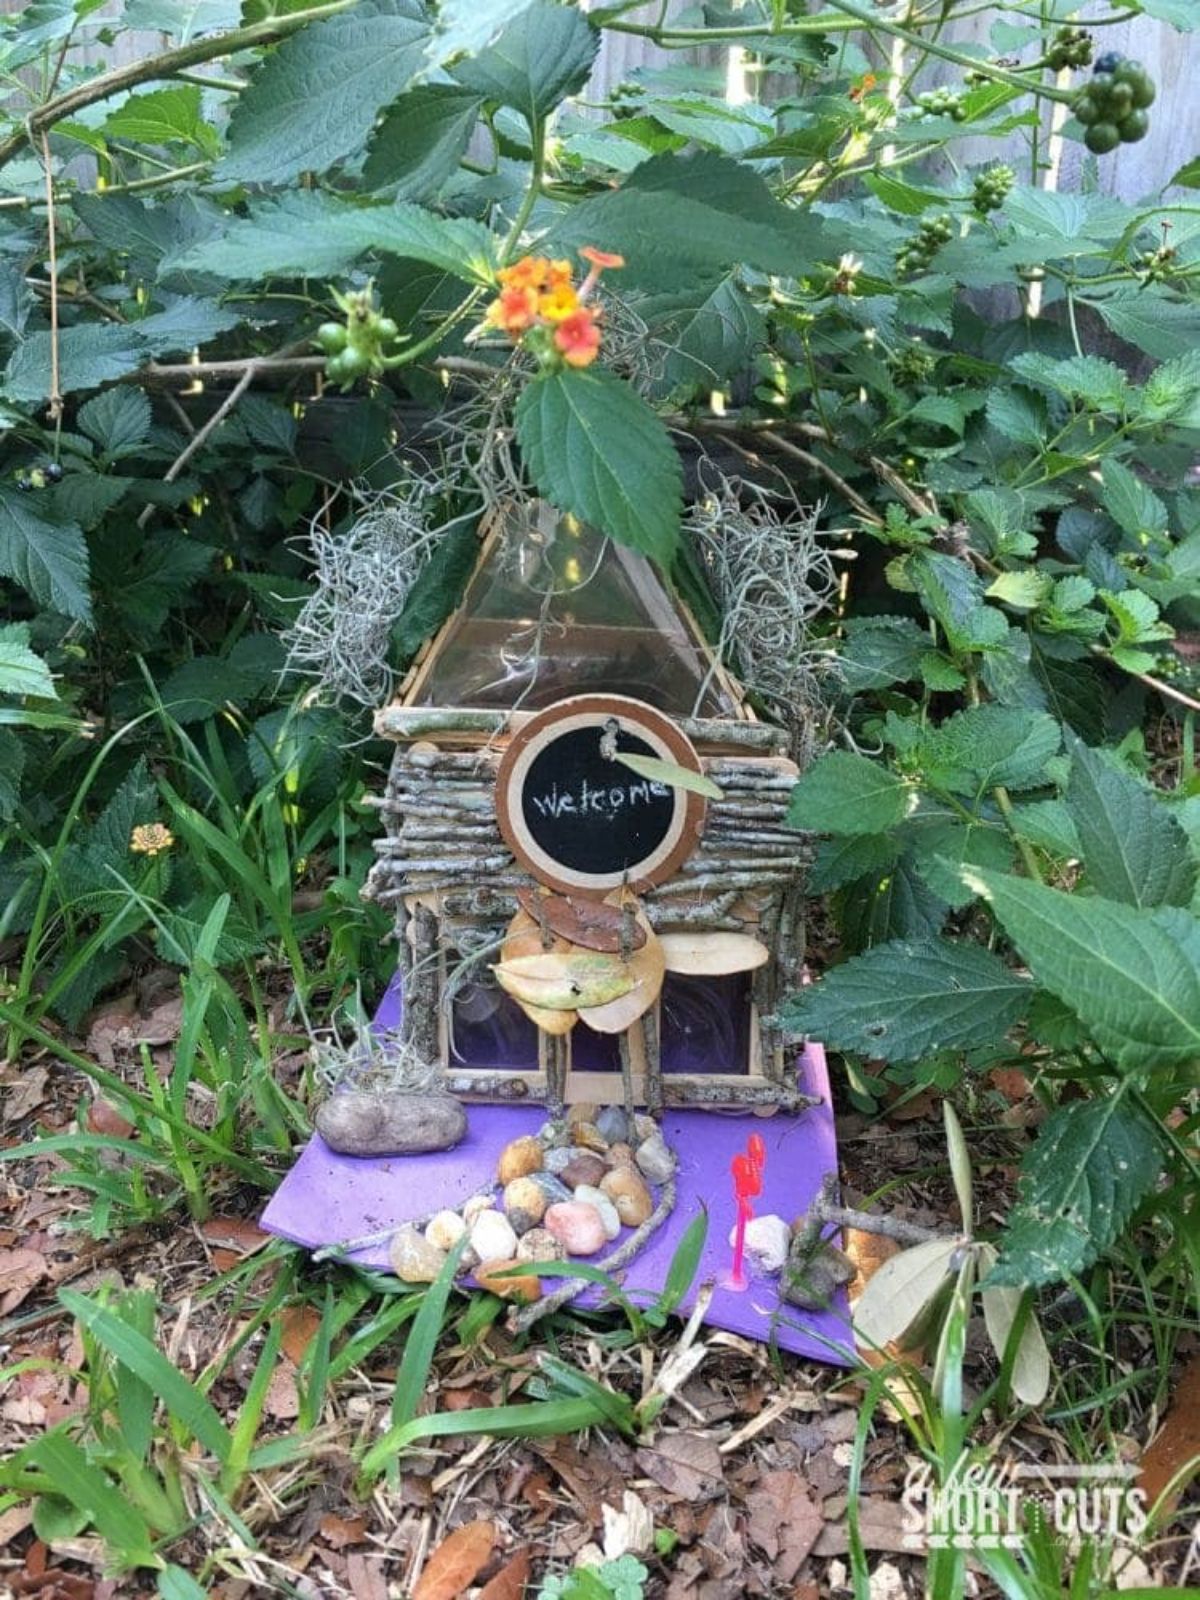 Small fairy house in a garden between plants.